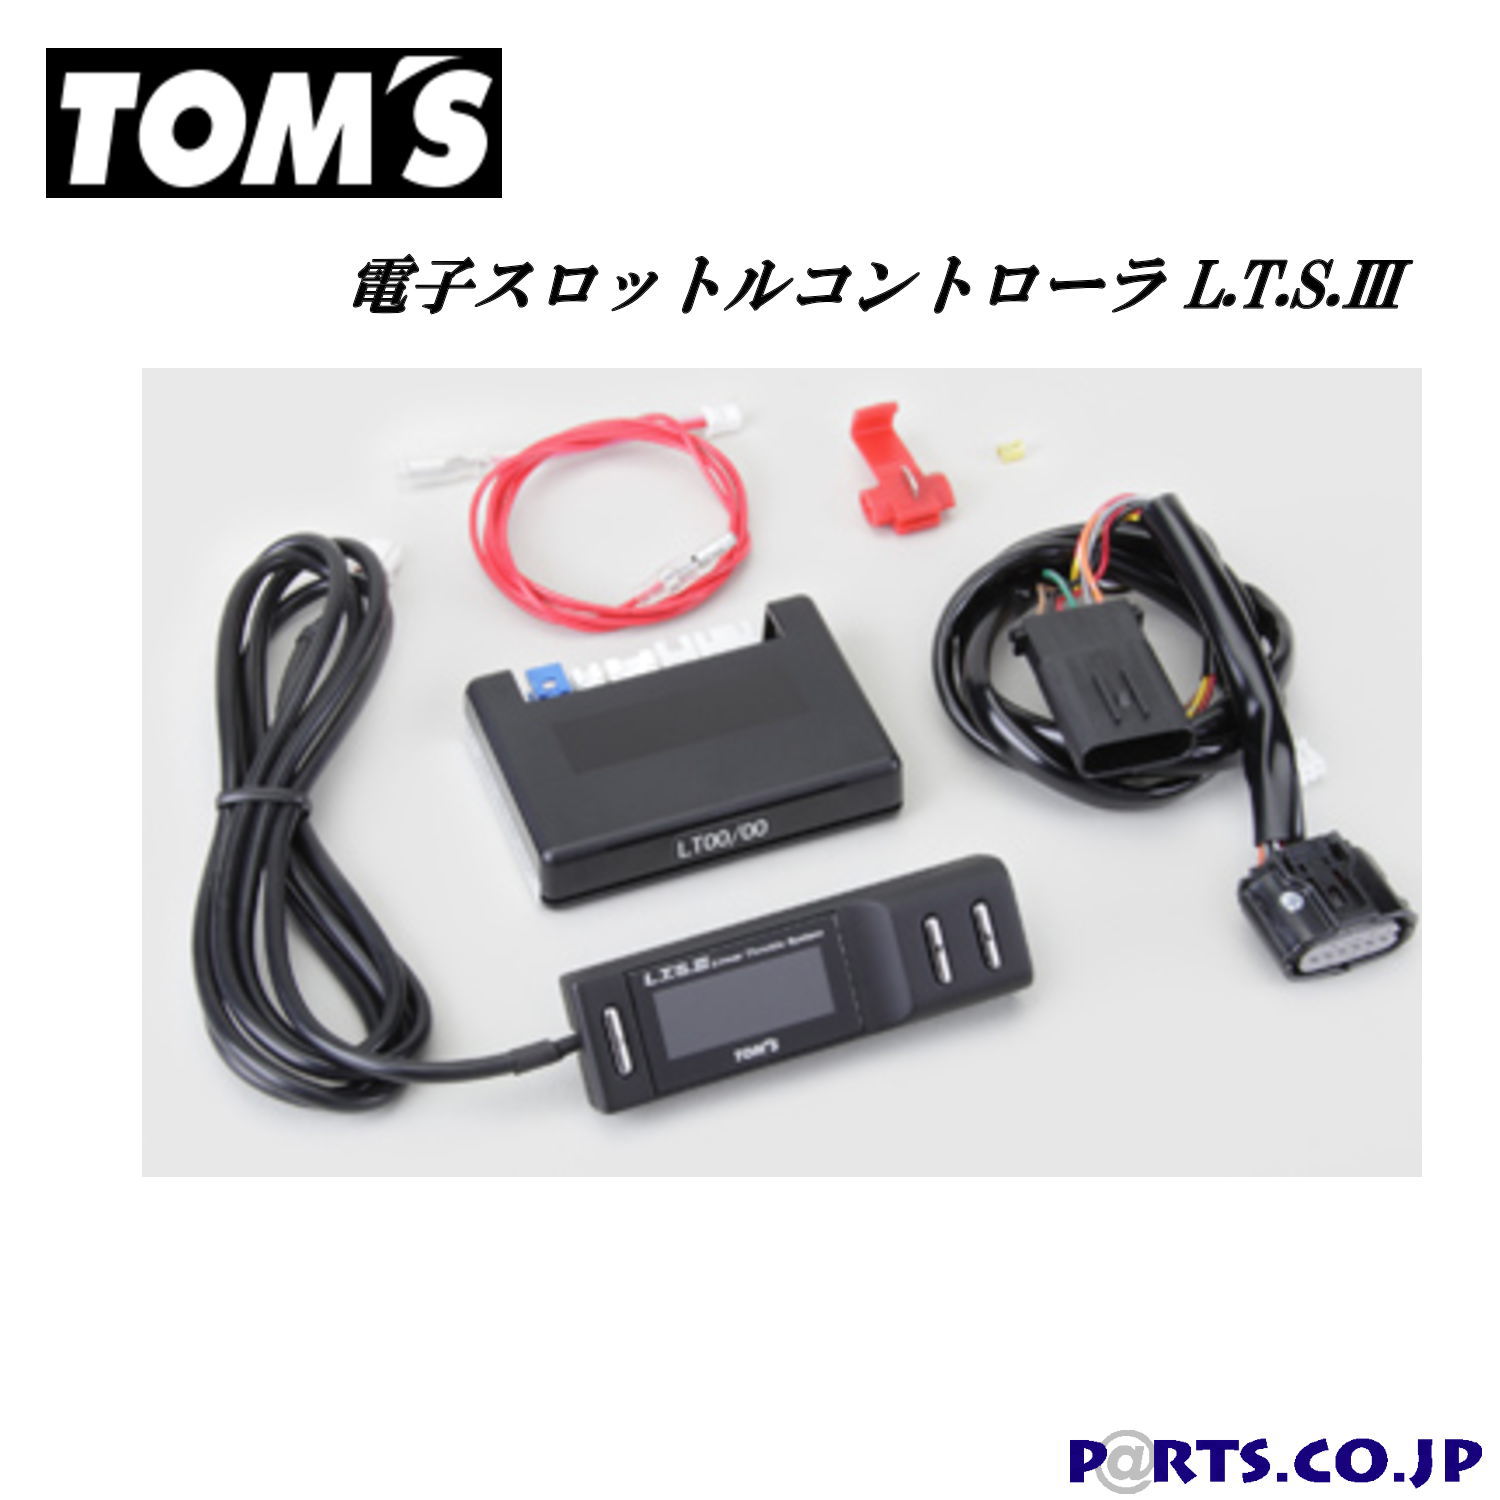 Tom S トムス 電子スロットルコントローラ H17 T 4 S Gse2 8 H25 Is L 全